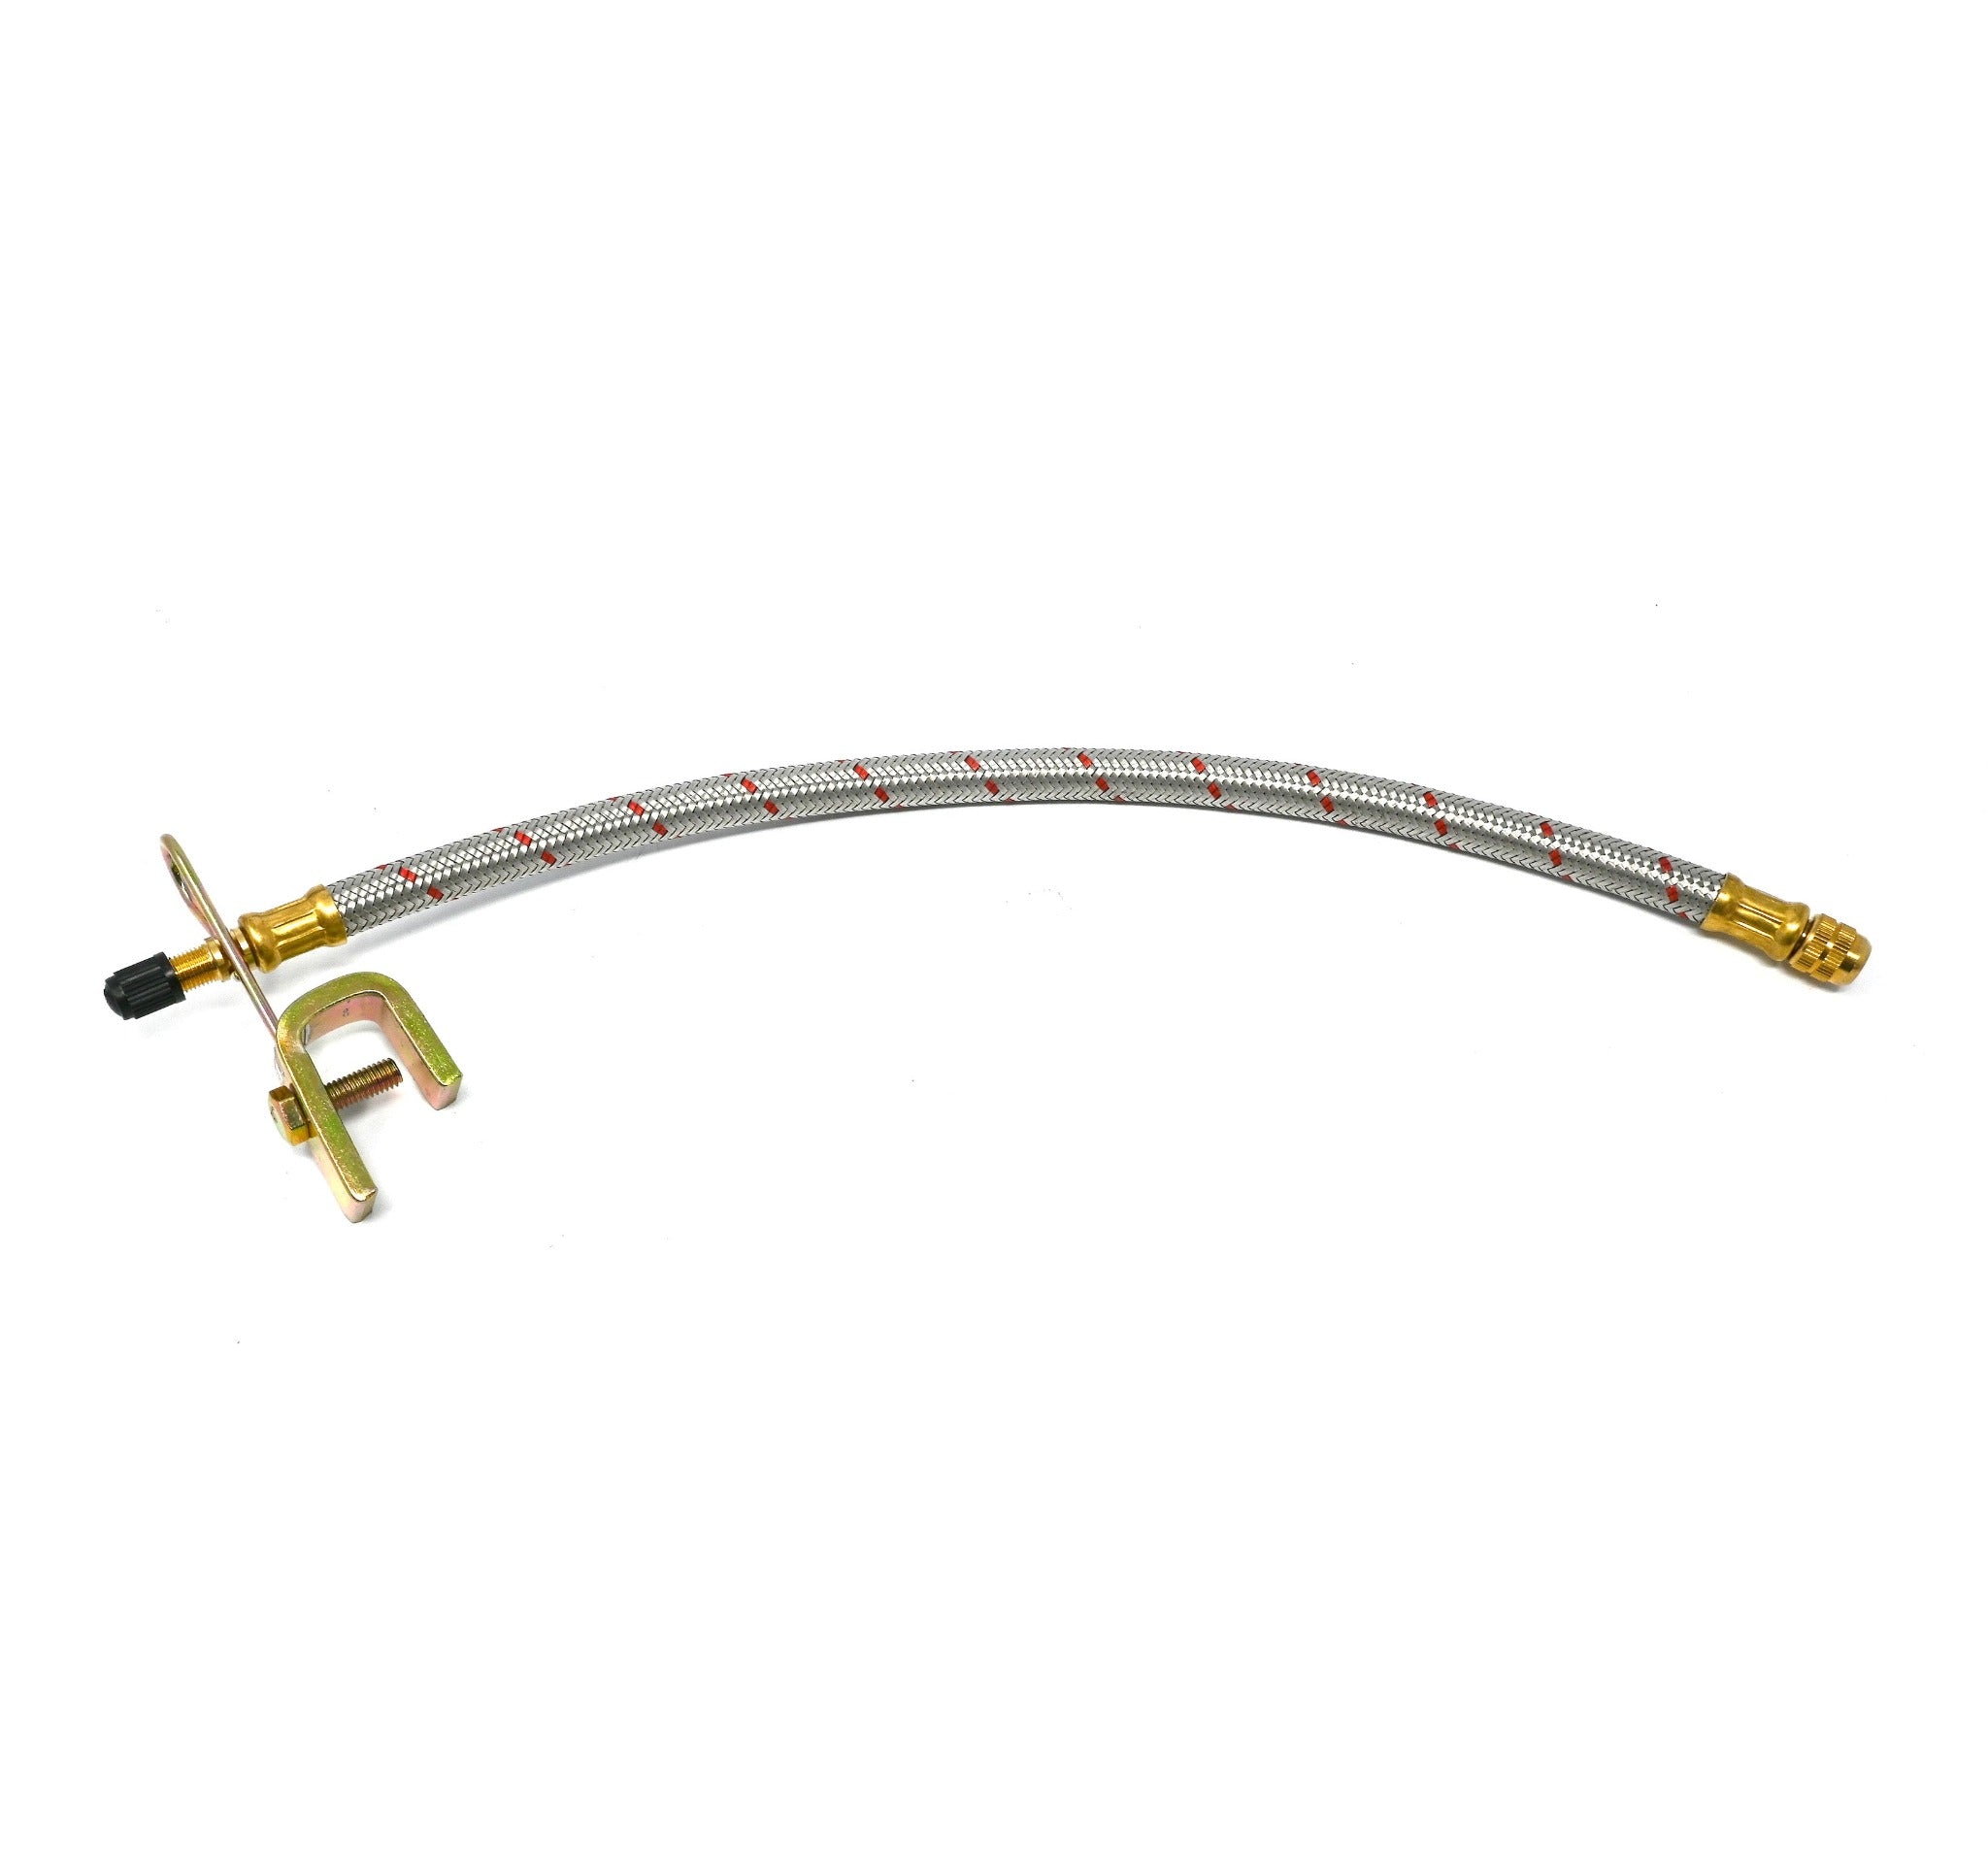 Flexible Braided Metal Rubber Valve Extension - 14 Inches